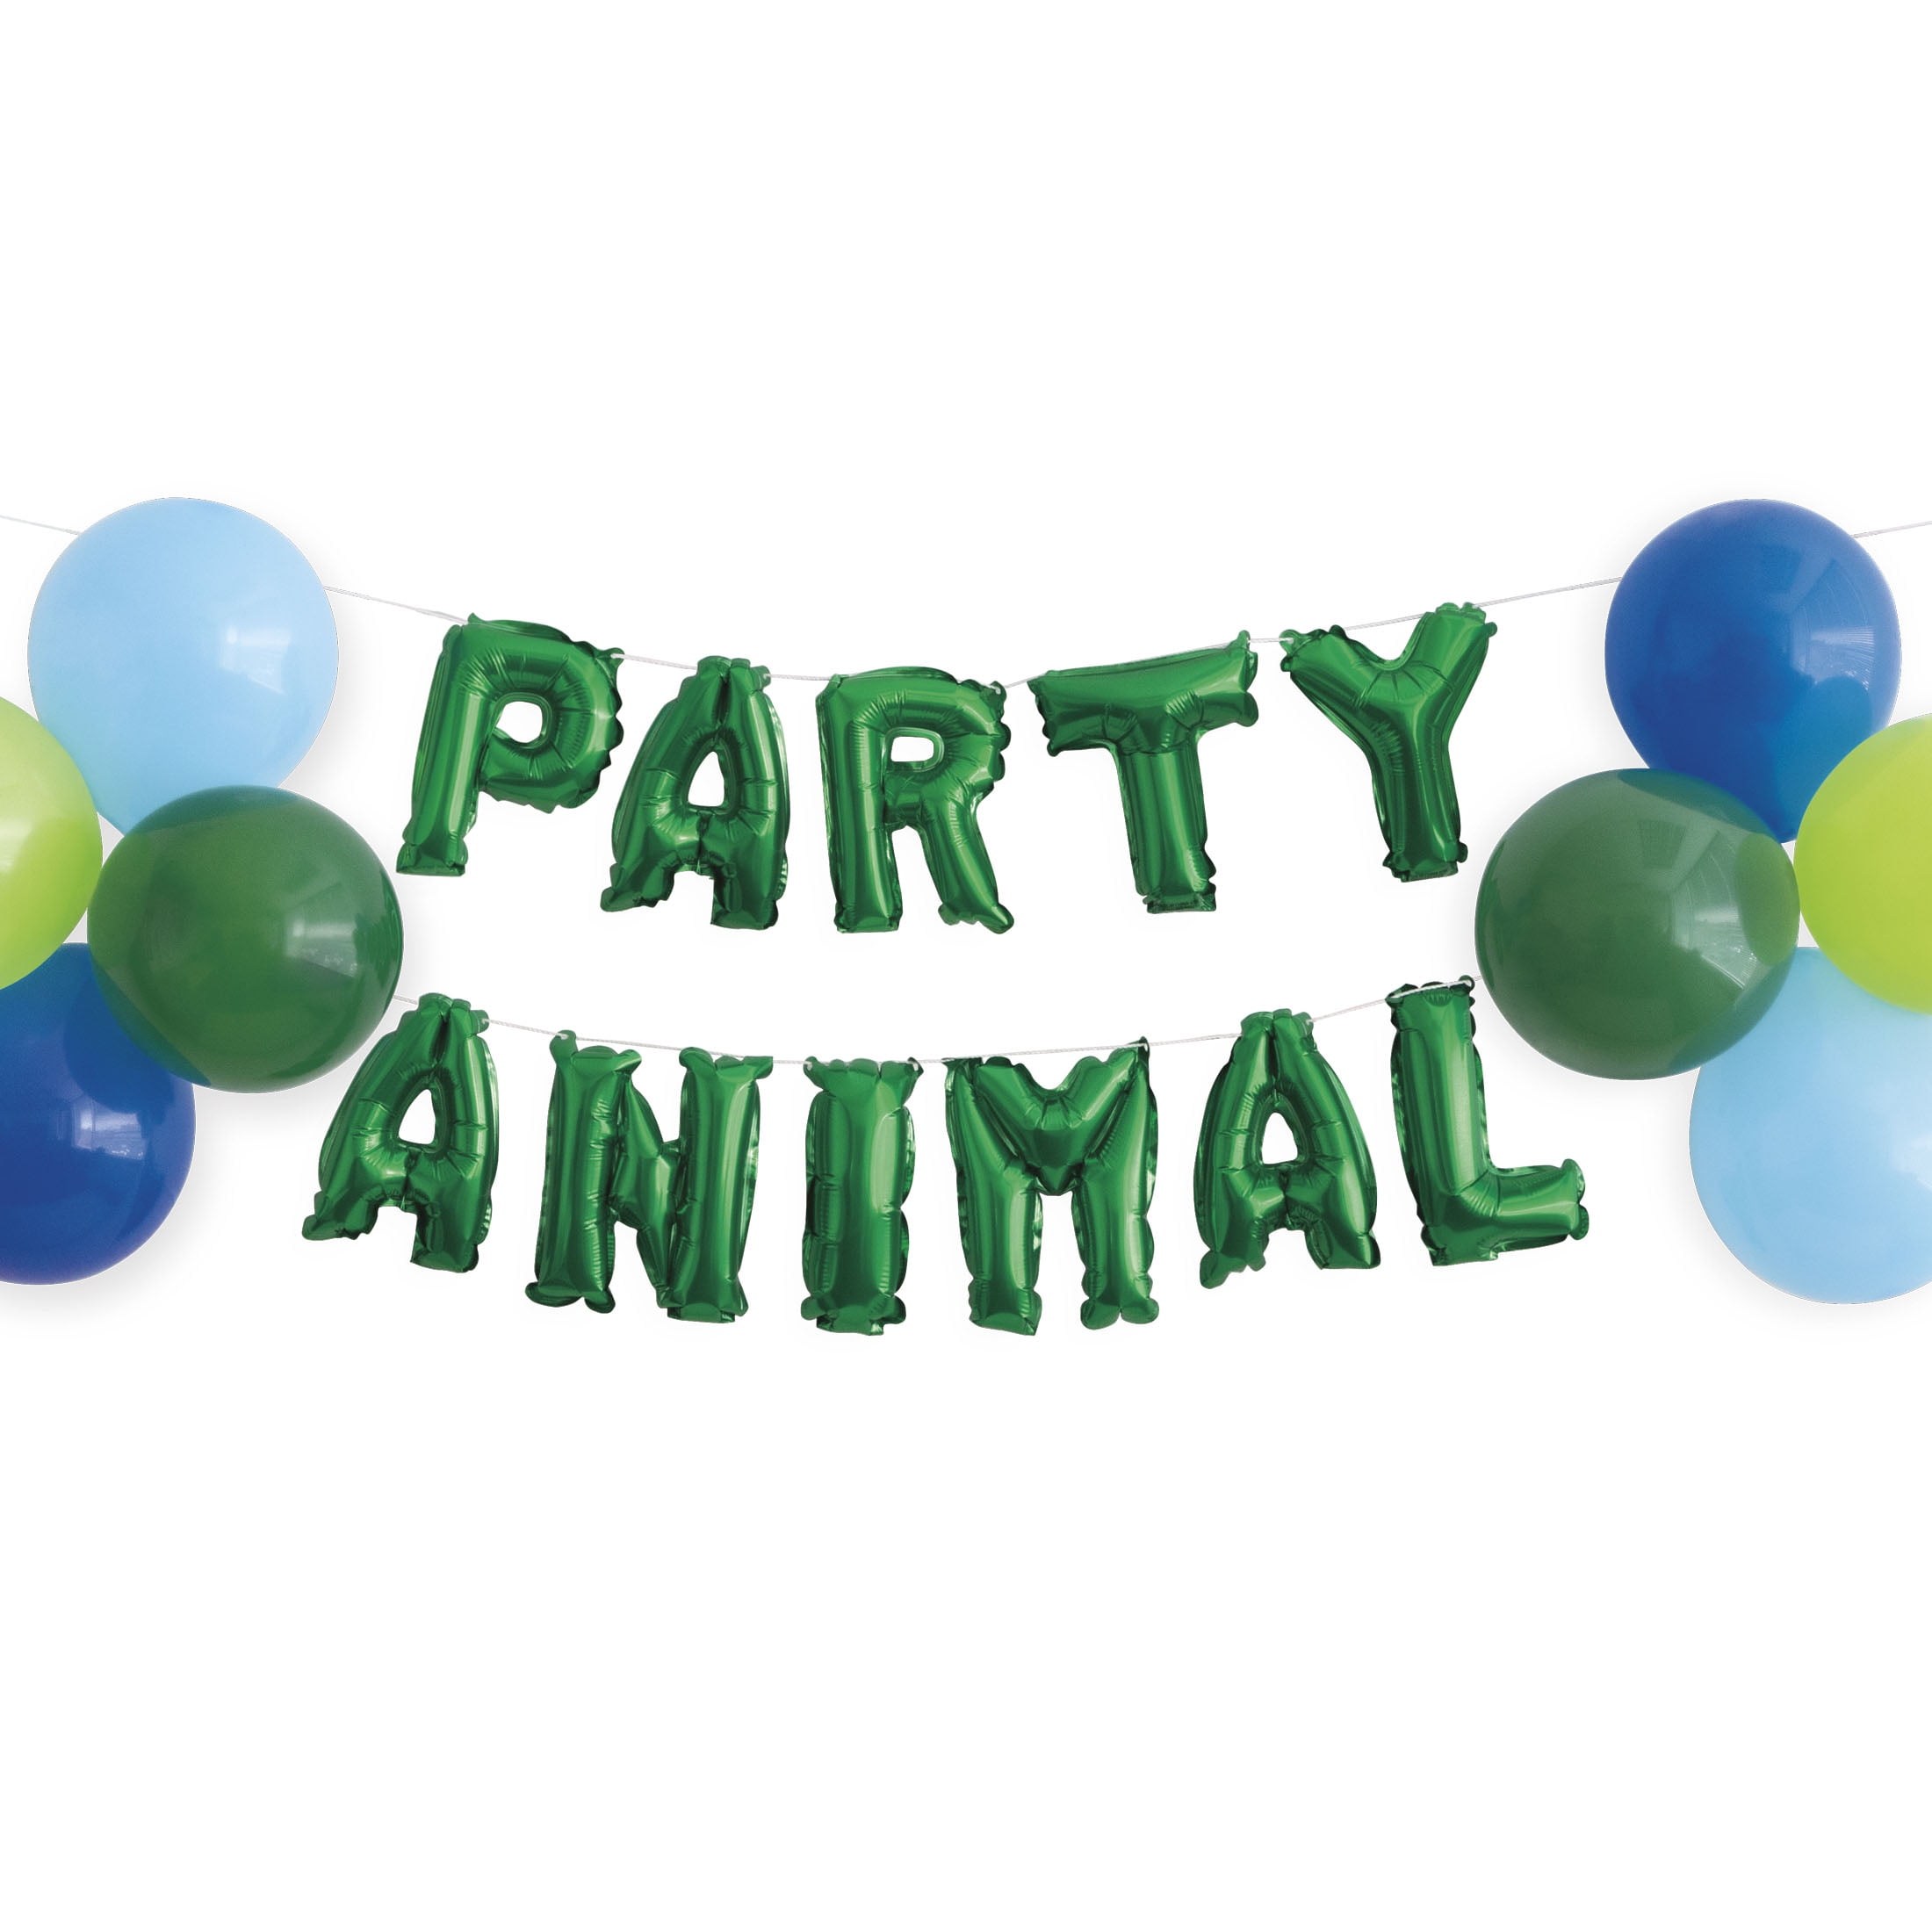 Ssyihao Jungle Theme Party Supplies 16 Inch with Happy Birthday Banner 12pcs 